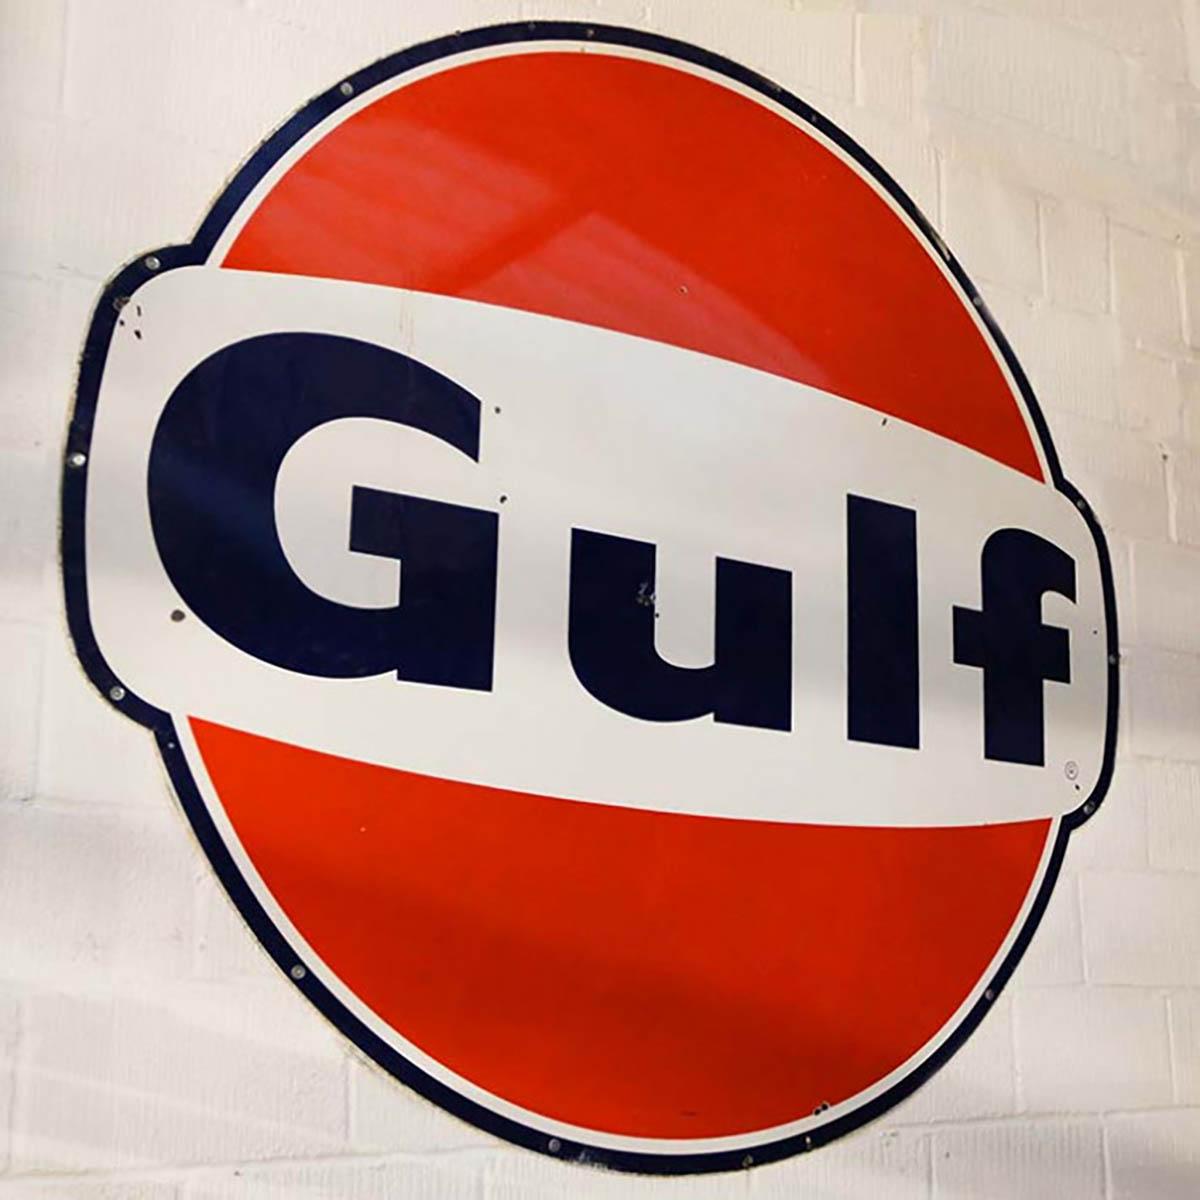 A classic Gulf advertising sign.

This stunning Gulf sign dates from the 1950s and at 6’ wide is a real showstopper. We recently acquired this fabulous piece in the USA, where it would originally have hung outside a dealership.

Gulf Oil was a major